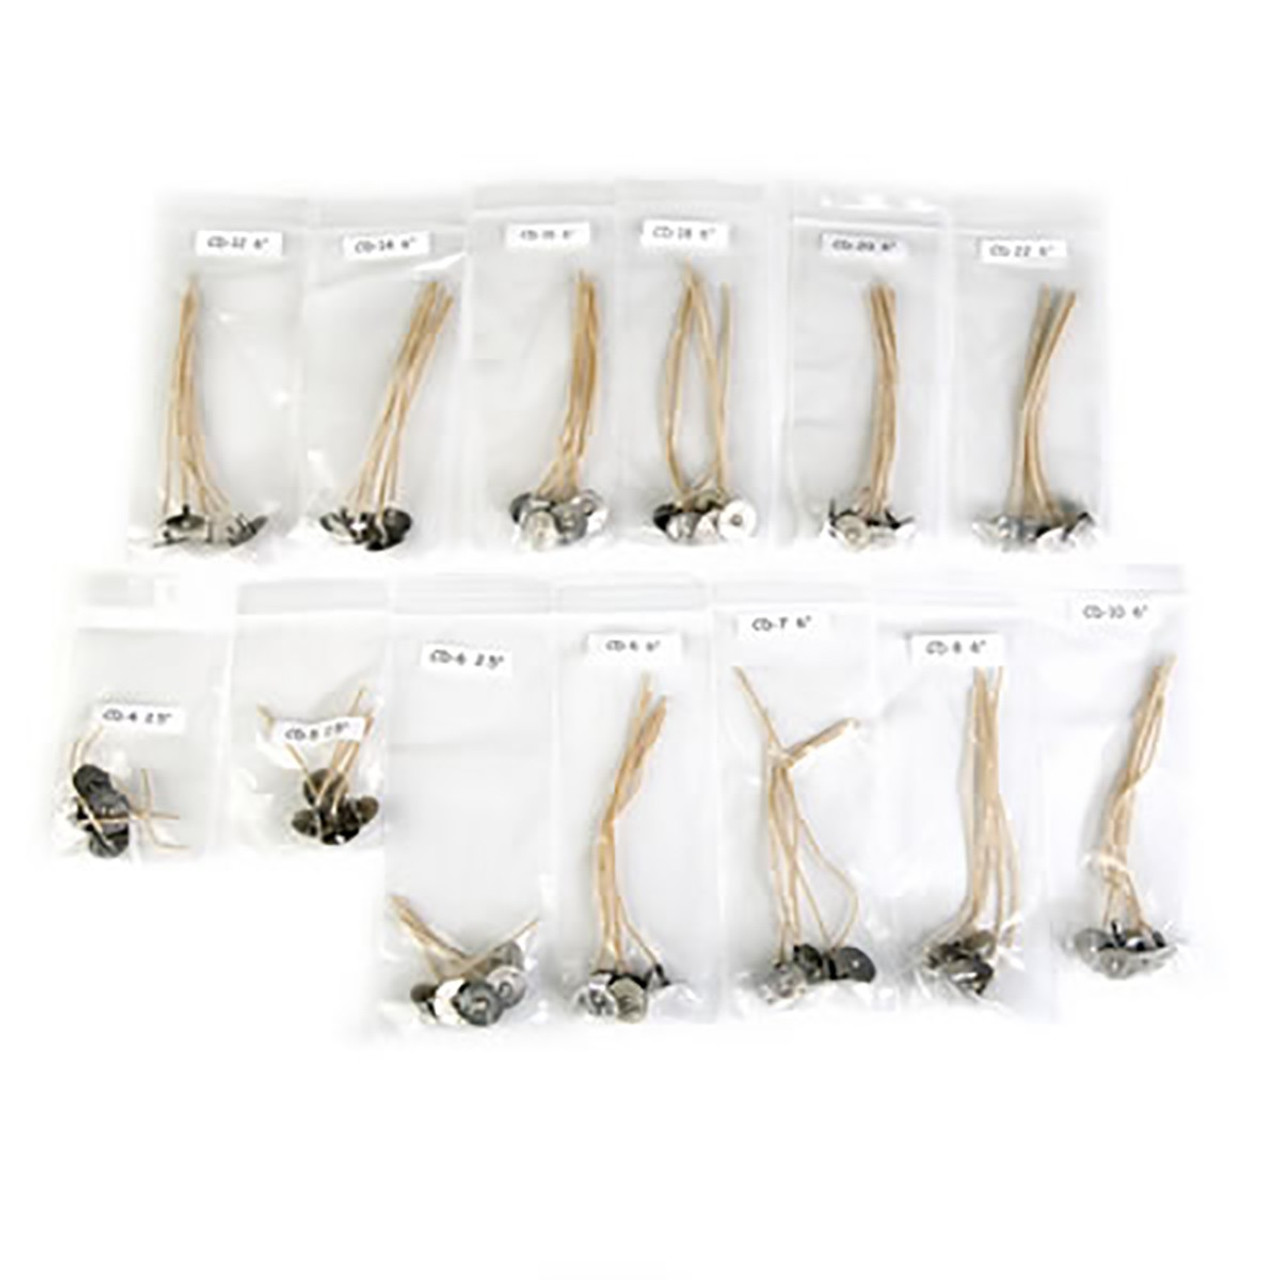 Sample Pack of Wick Centering Tools - FREE SHIPPING